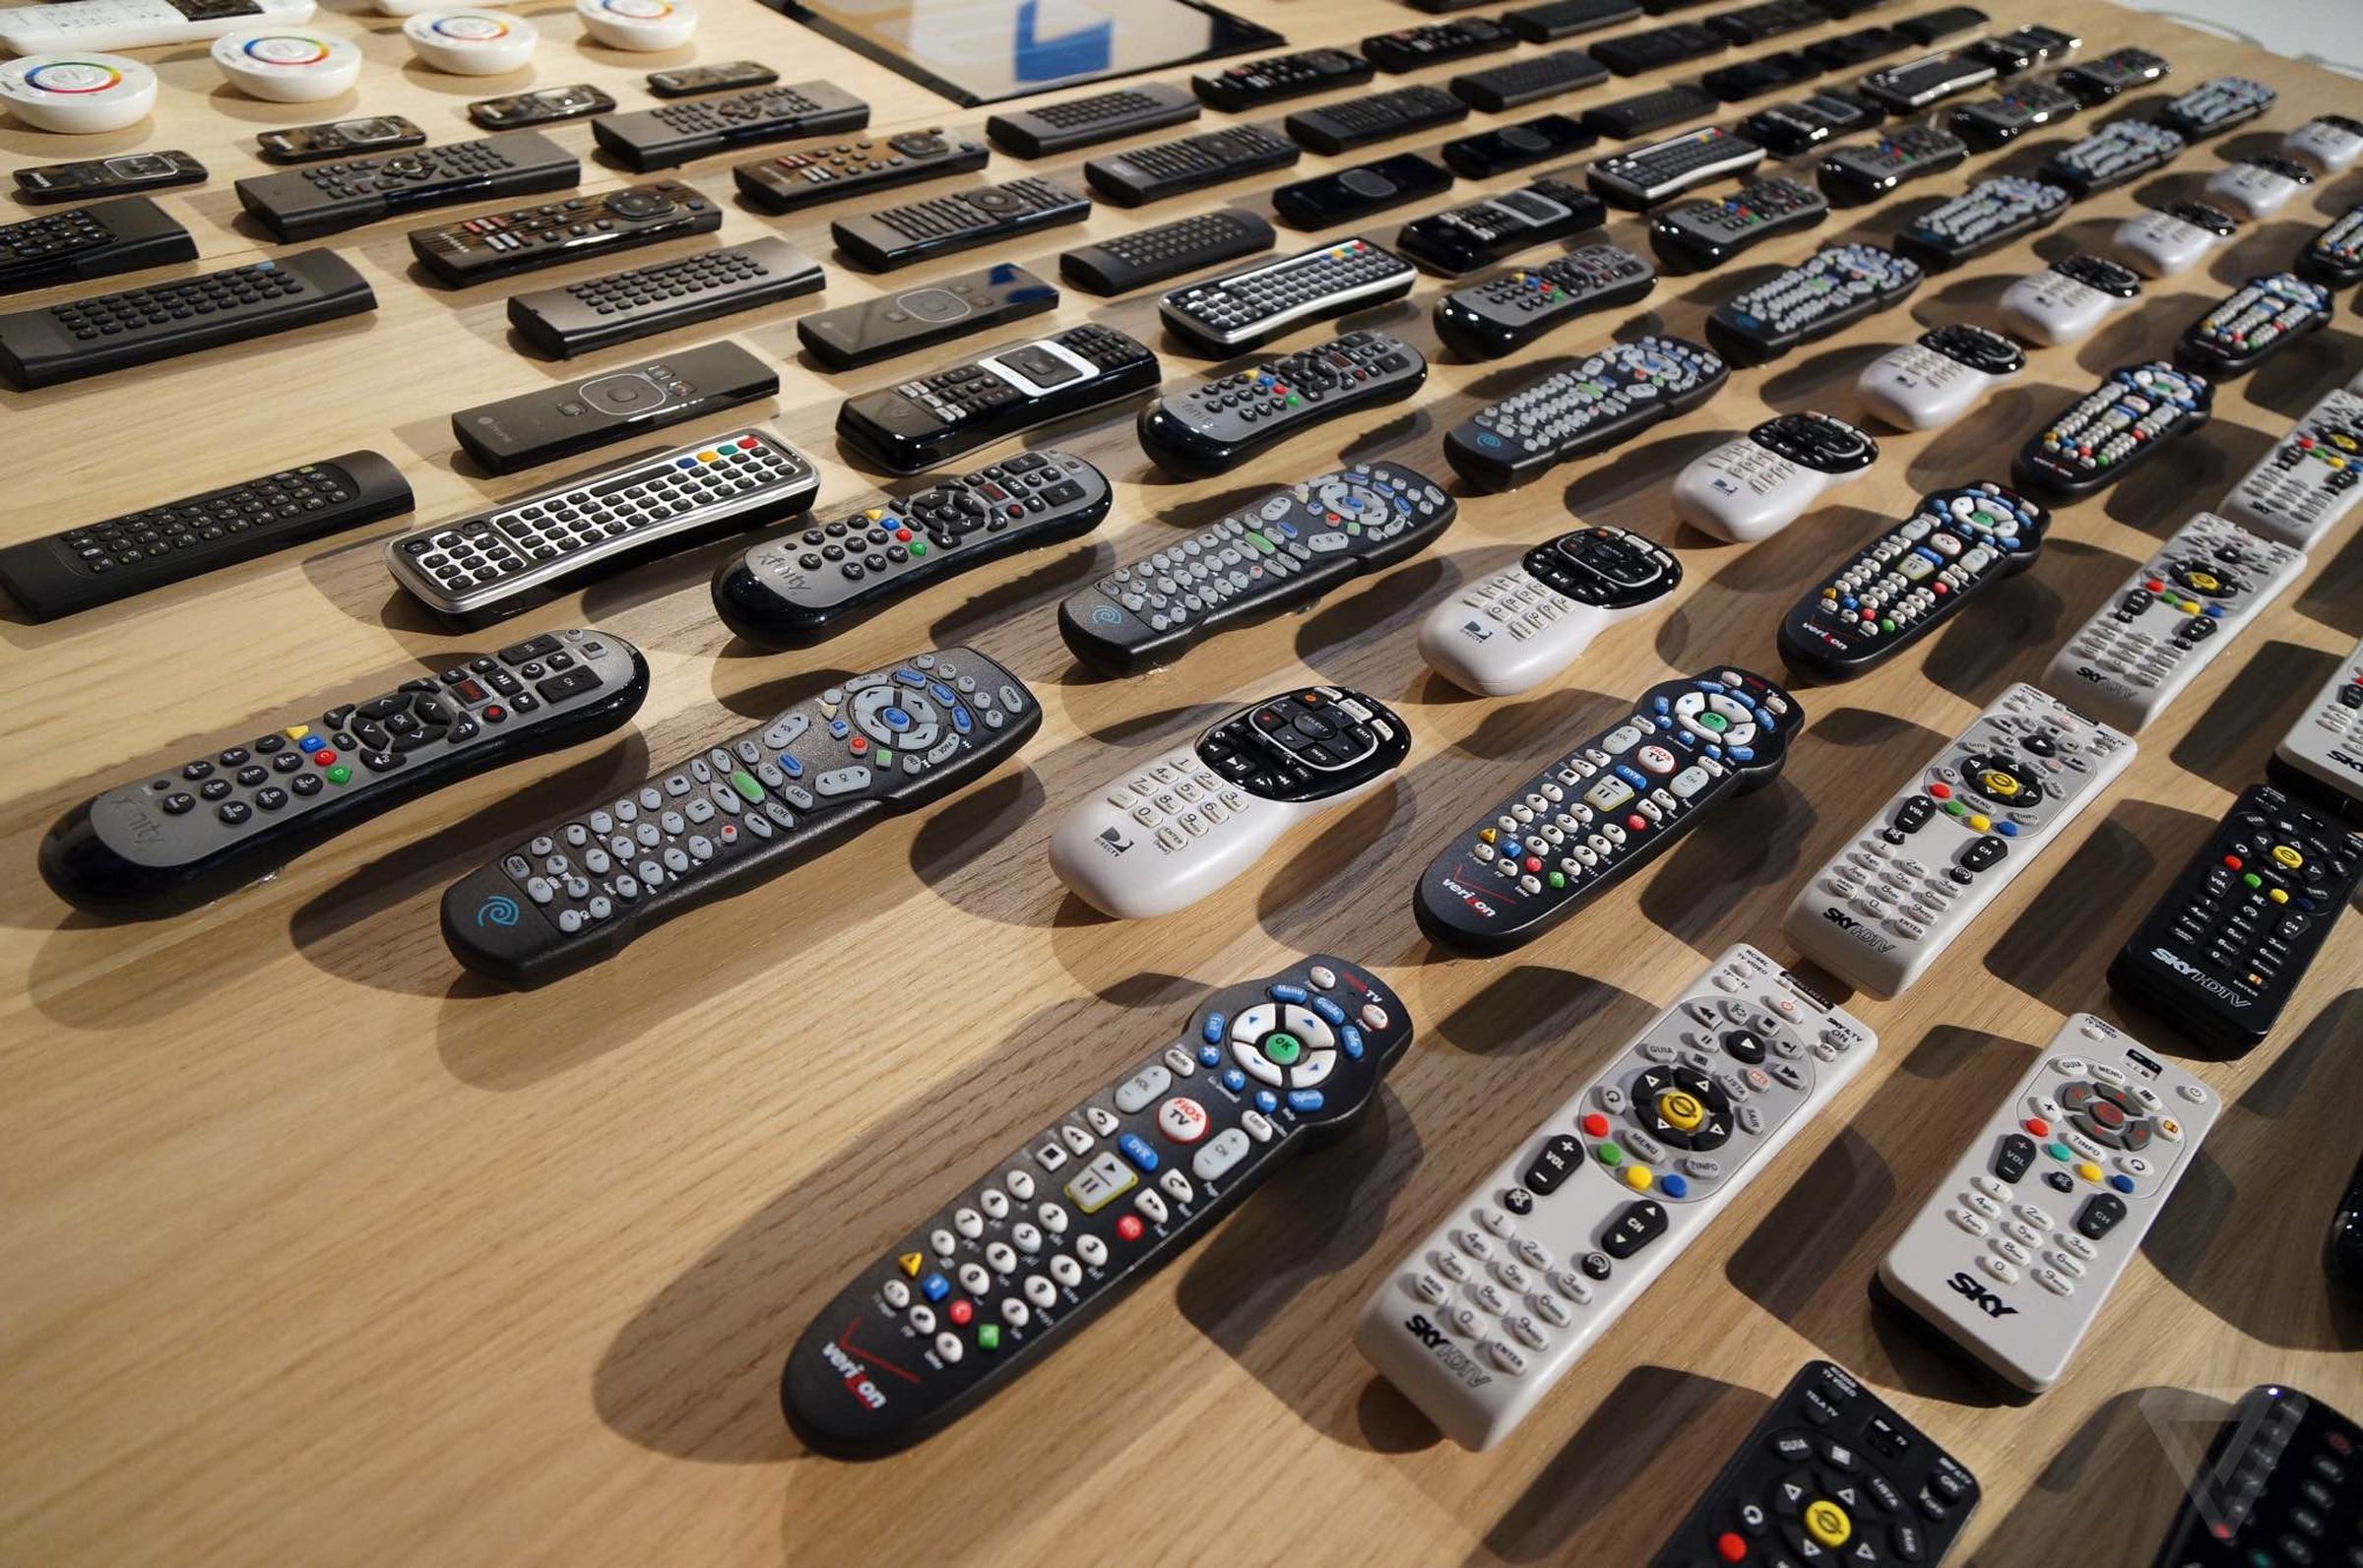 Philips remote controls at CES 2015